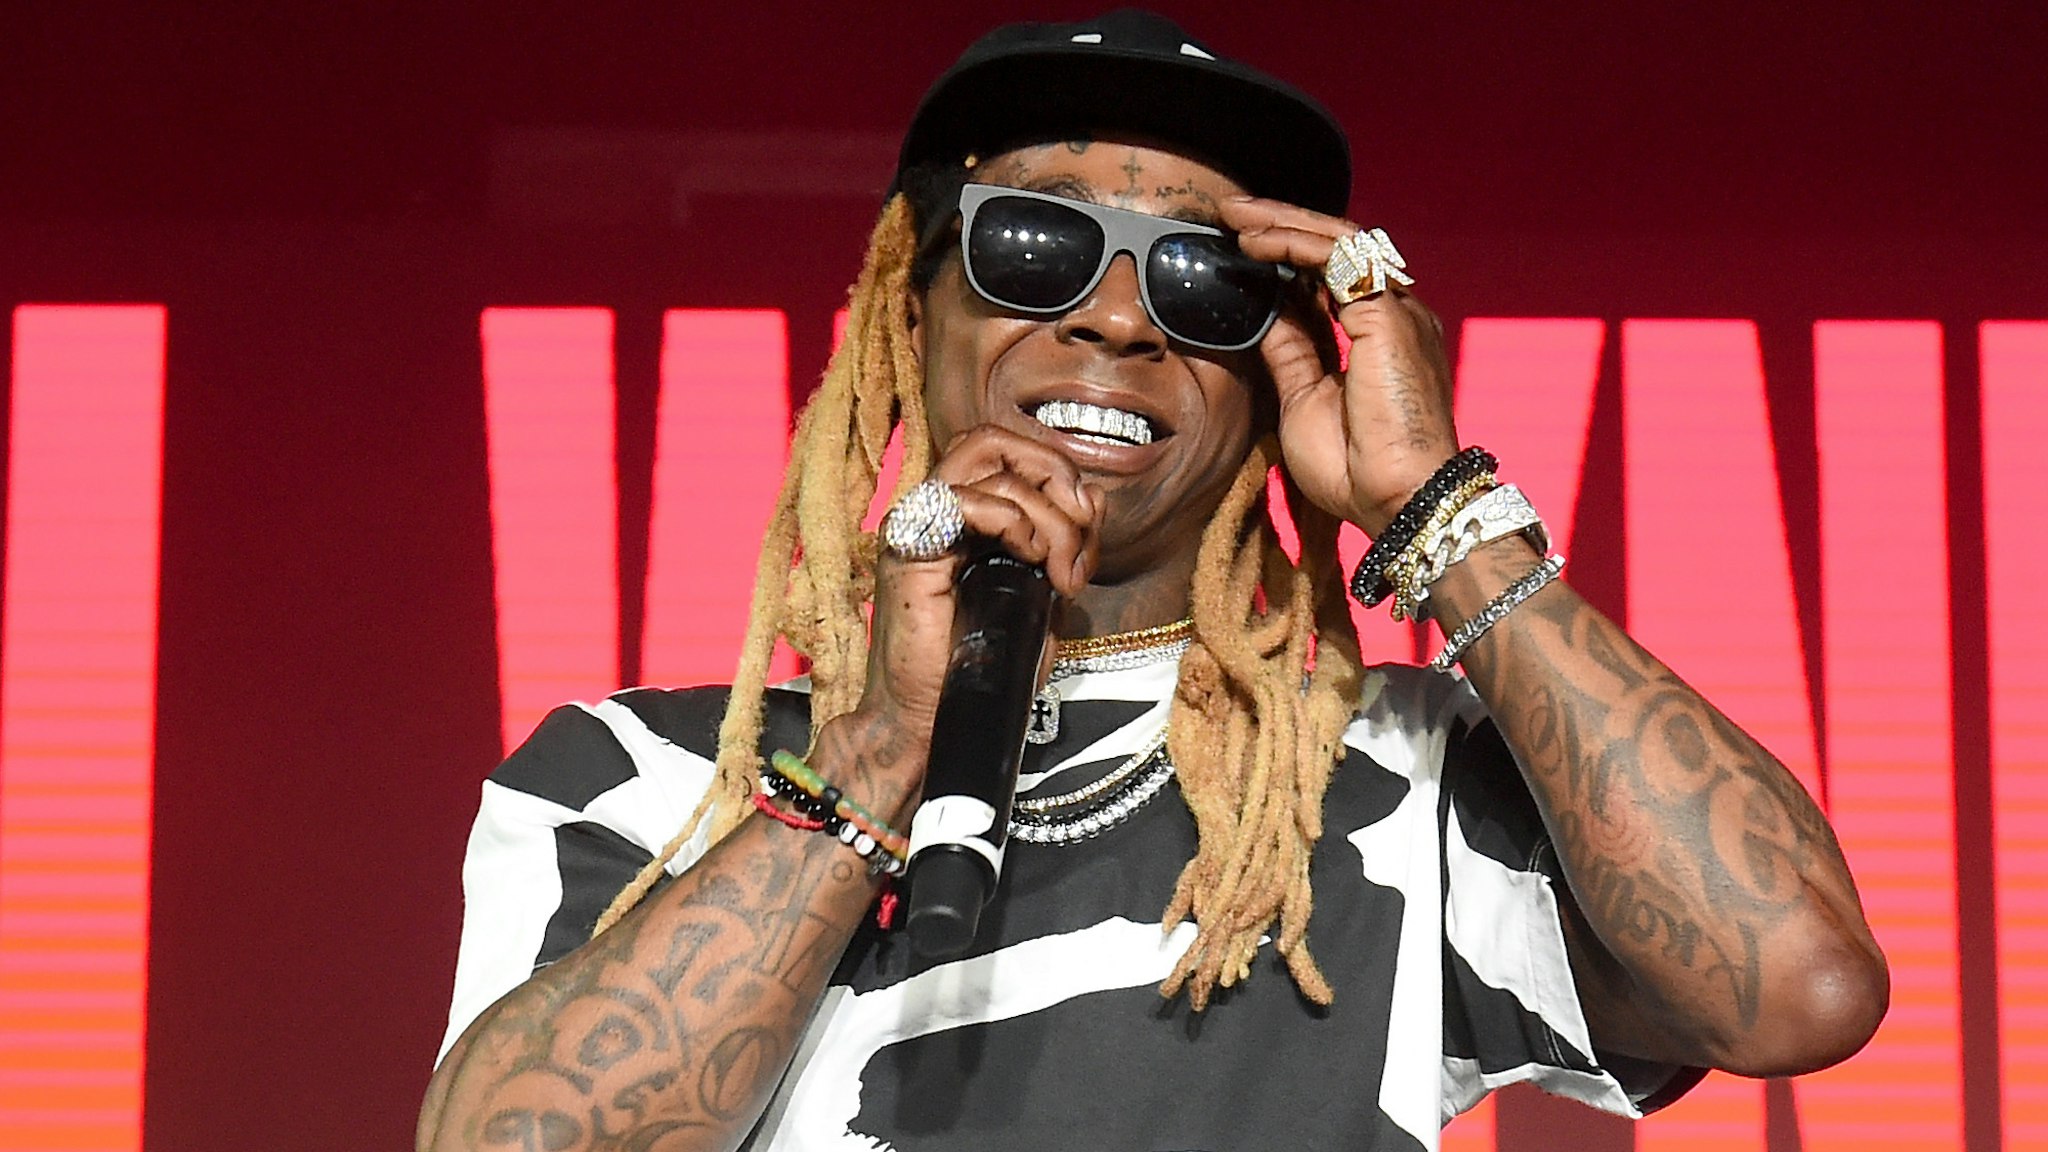 Lil Wayne performs onstage during BACARDI, Swizz Beatz and The Dean Collection bring NO COMMISSION back to Miami to celebrate "Island Might" at Soho Studios on December 9, 2017 in Miami, Florida.